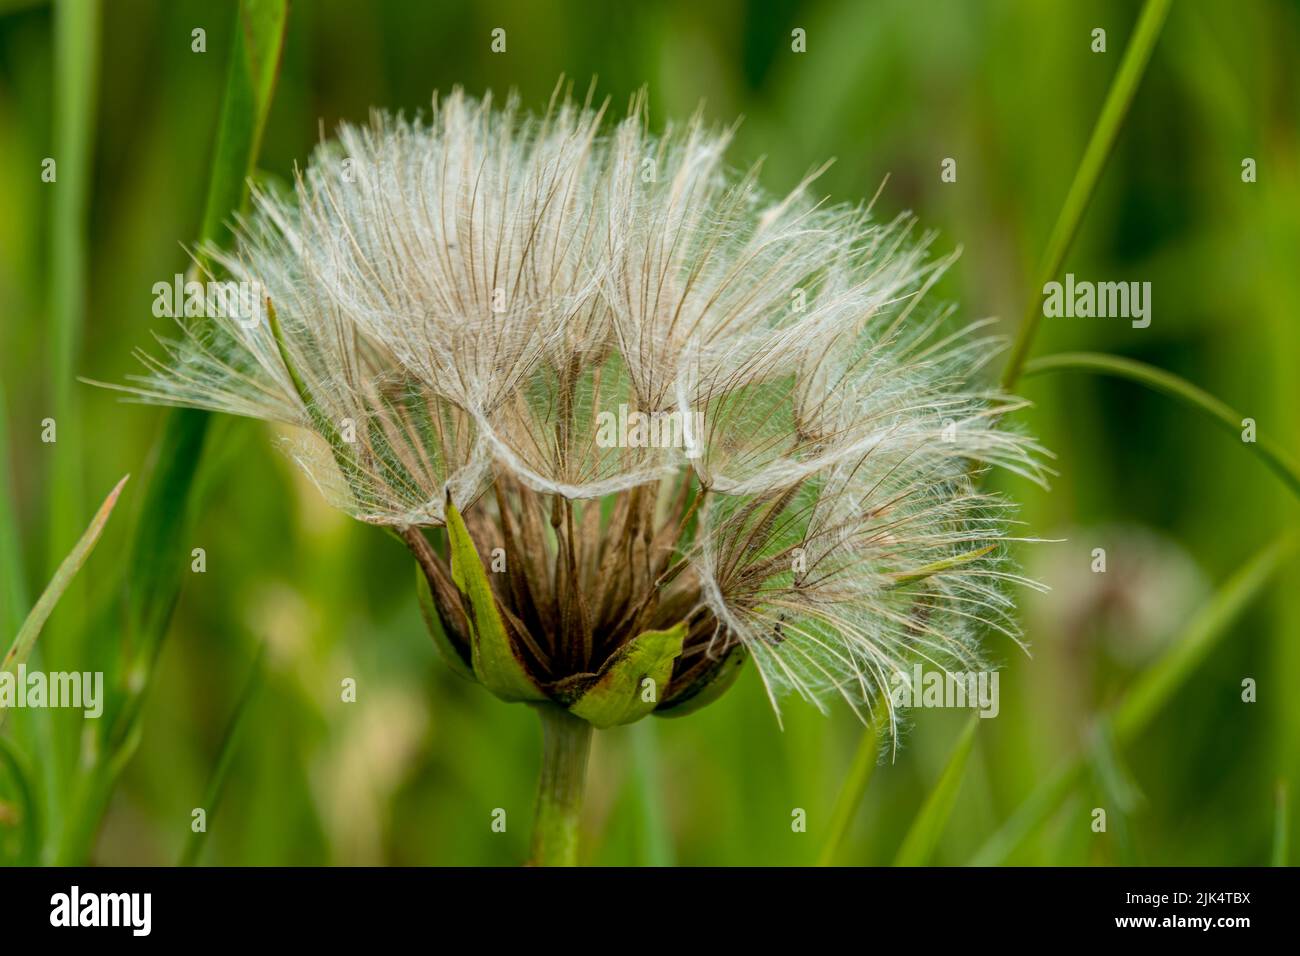 detailed close up of Meadow salsify (Tragopogon pratensis, showy goat's-beard or meadow goat's beard) Stock Photo